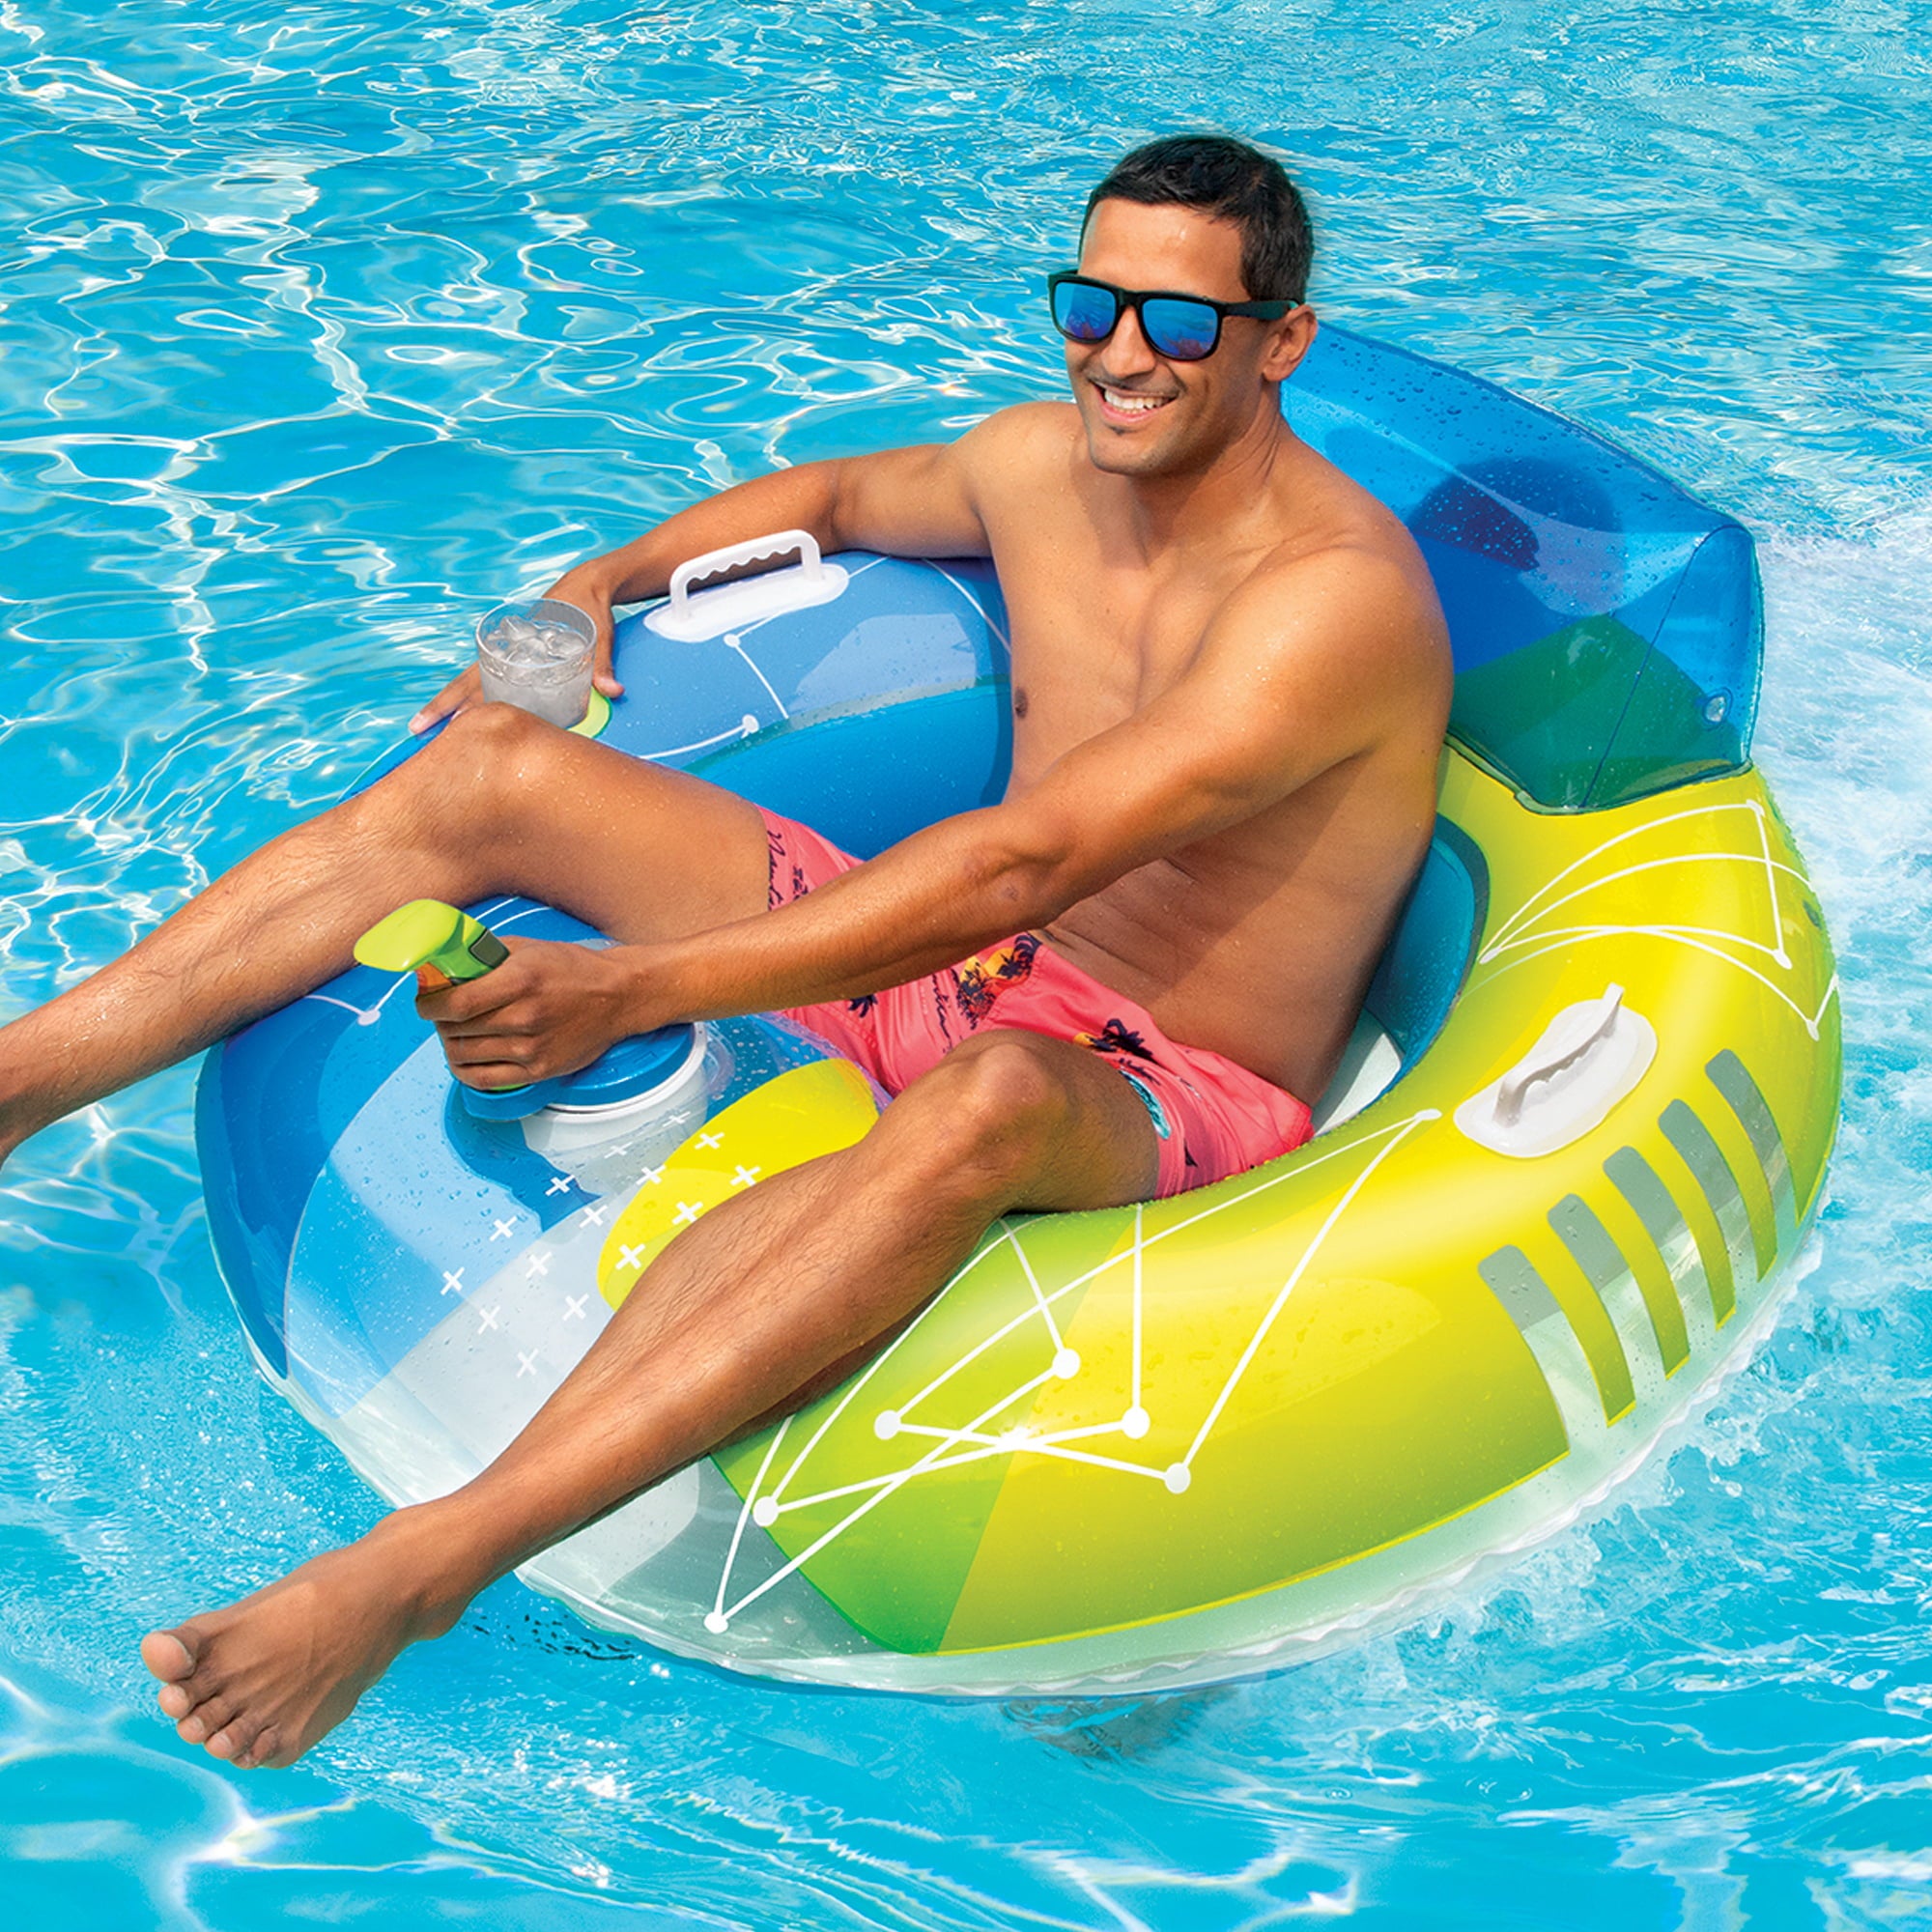 Banzai Motorized Pool Cruiser Multicolor Teens Adults Battery Powered PVC Summer Float, Ages 14+, Unisex